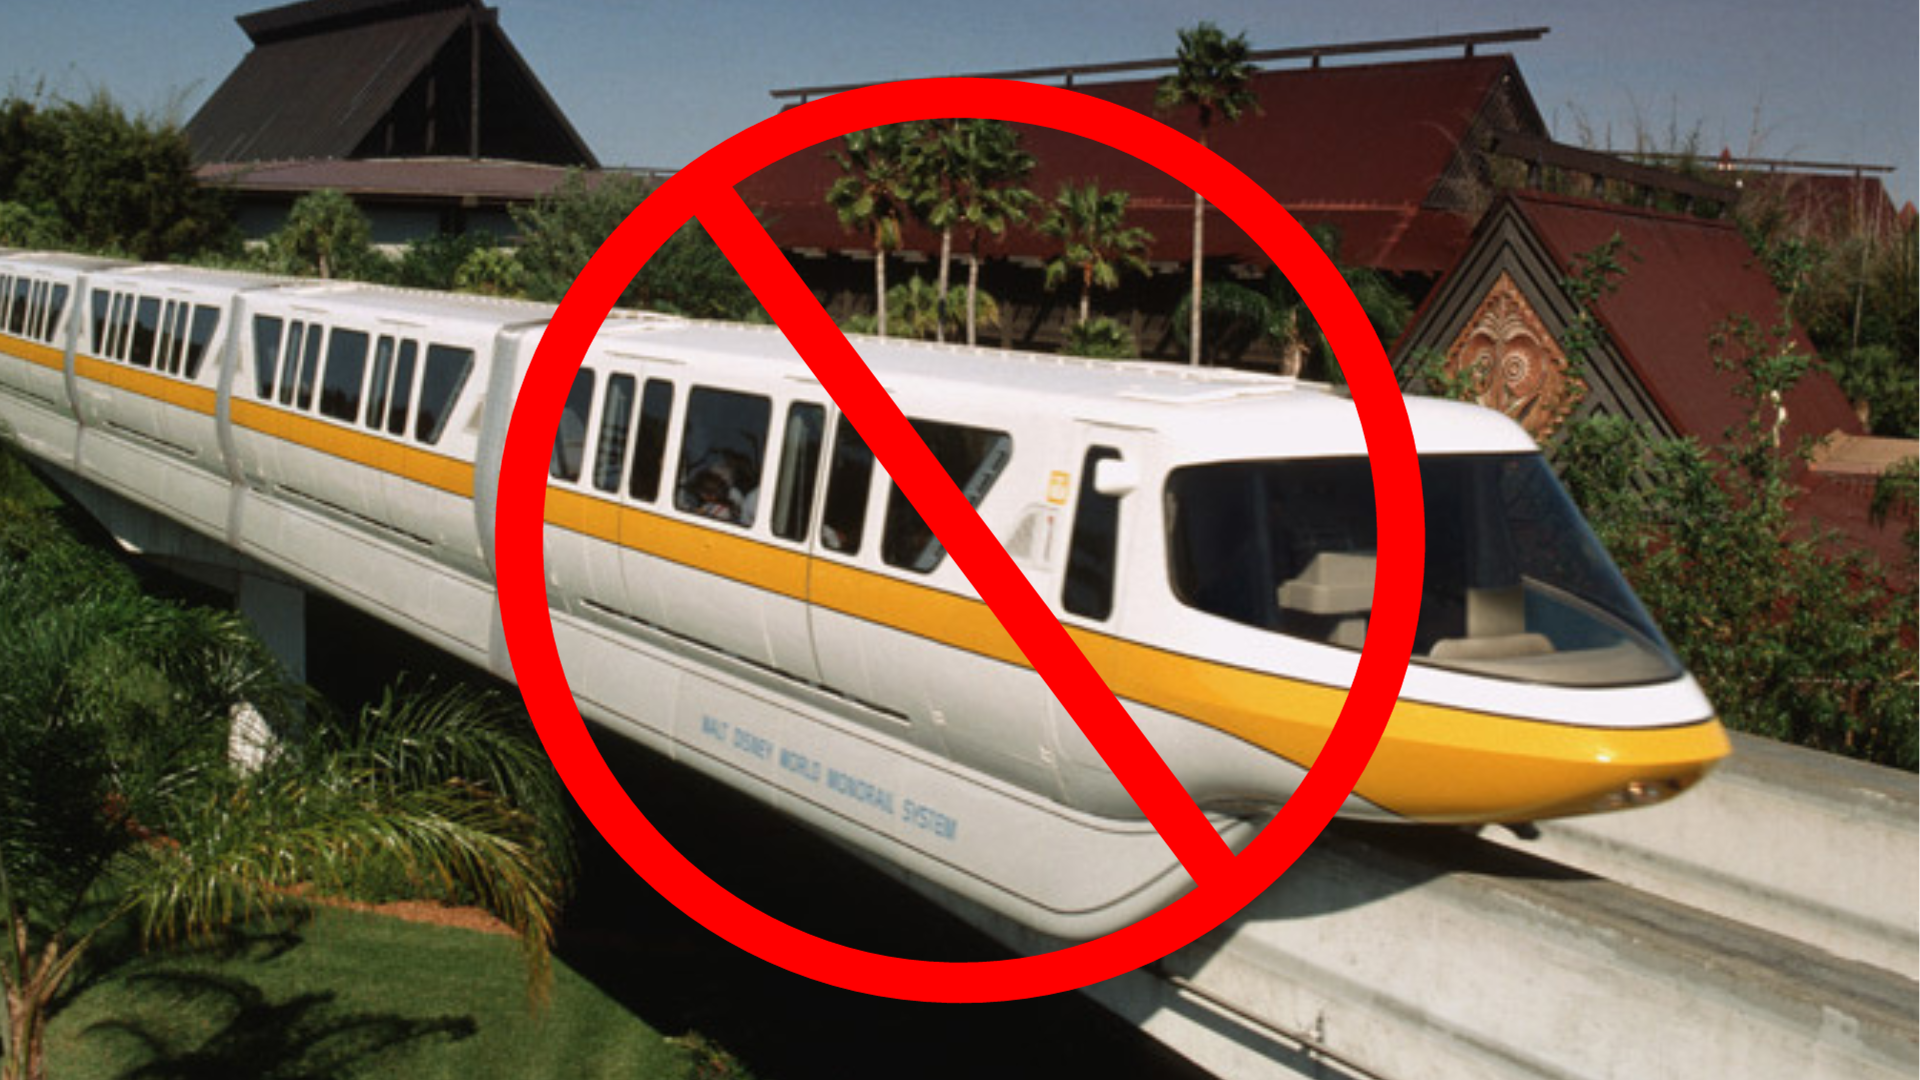 Disney is removing the monorail and installing walkways instead